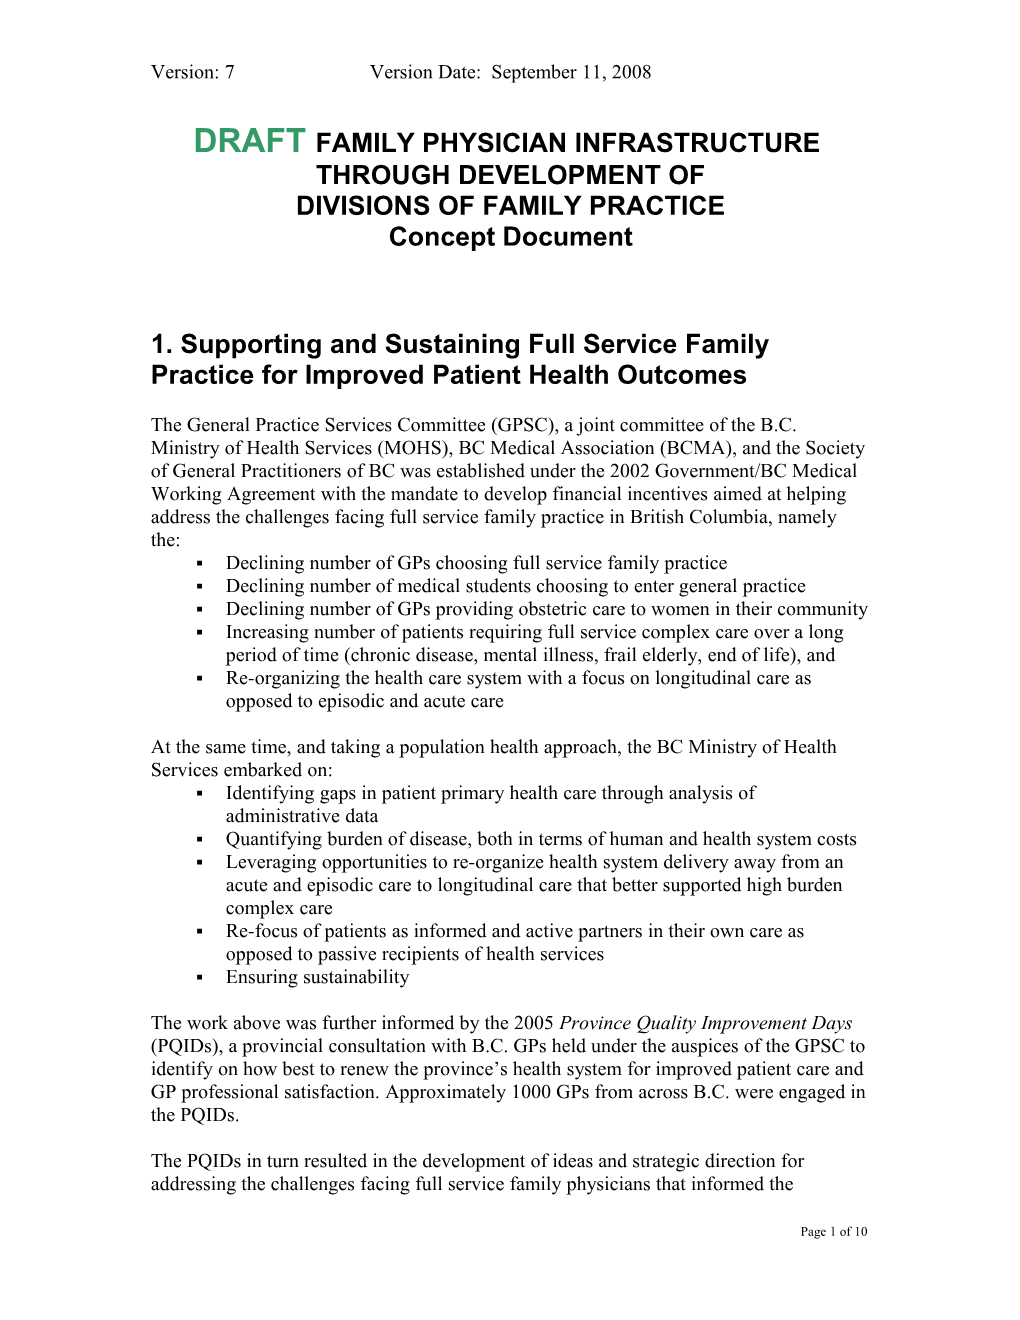 Draft Family Physician Infrastructure